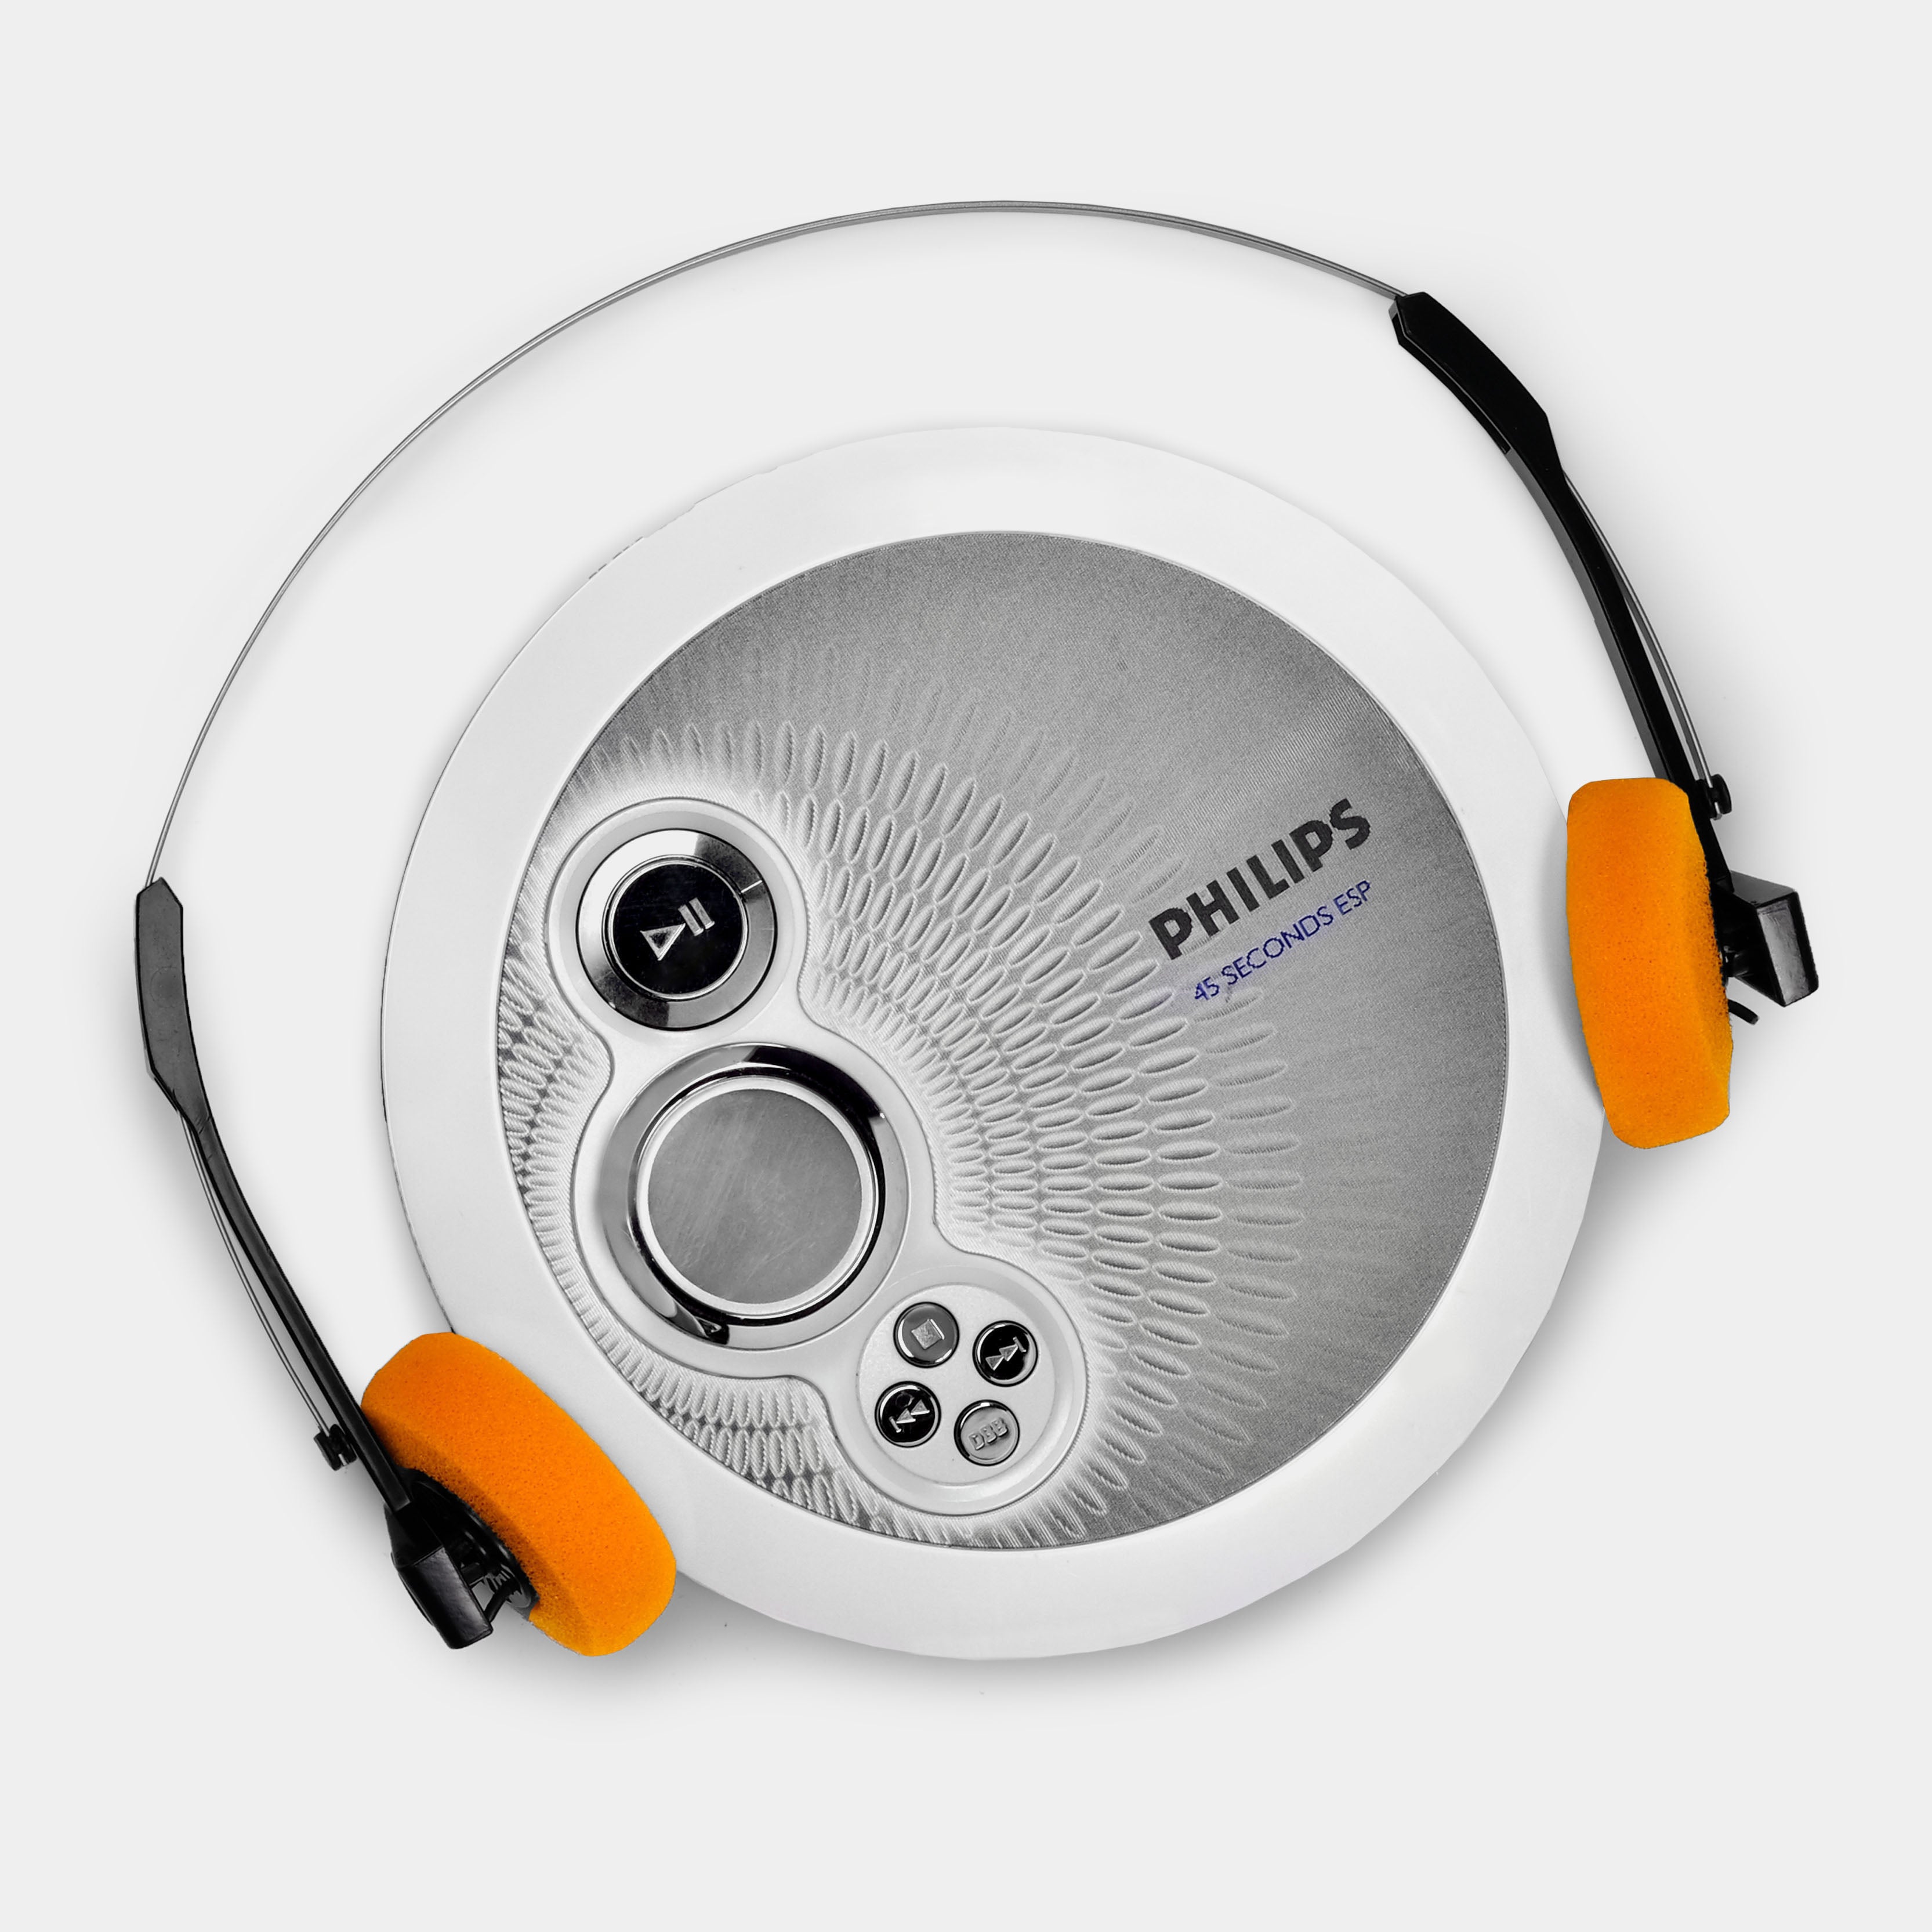 Philips AX2411/17 Portable CD Player